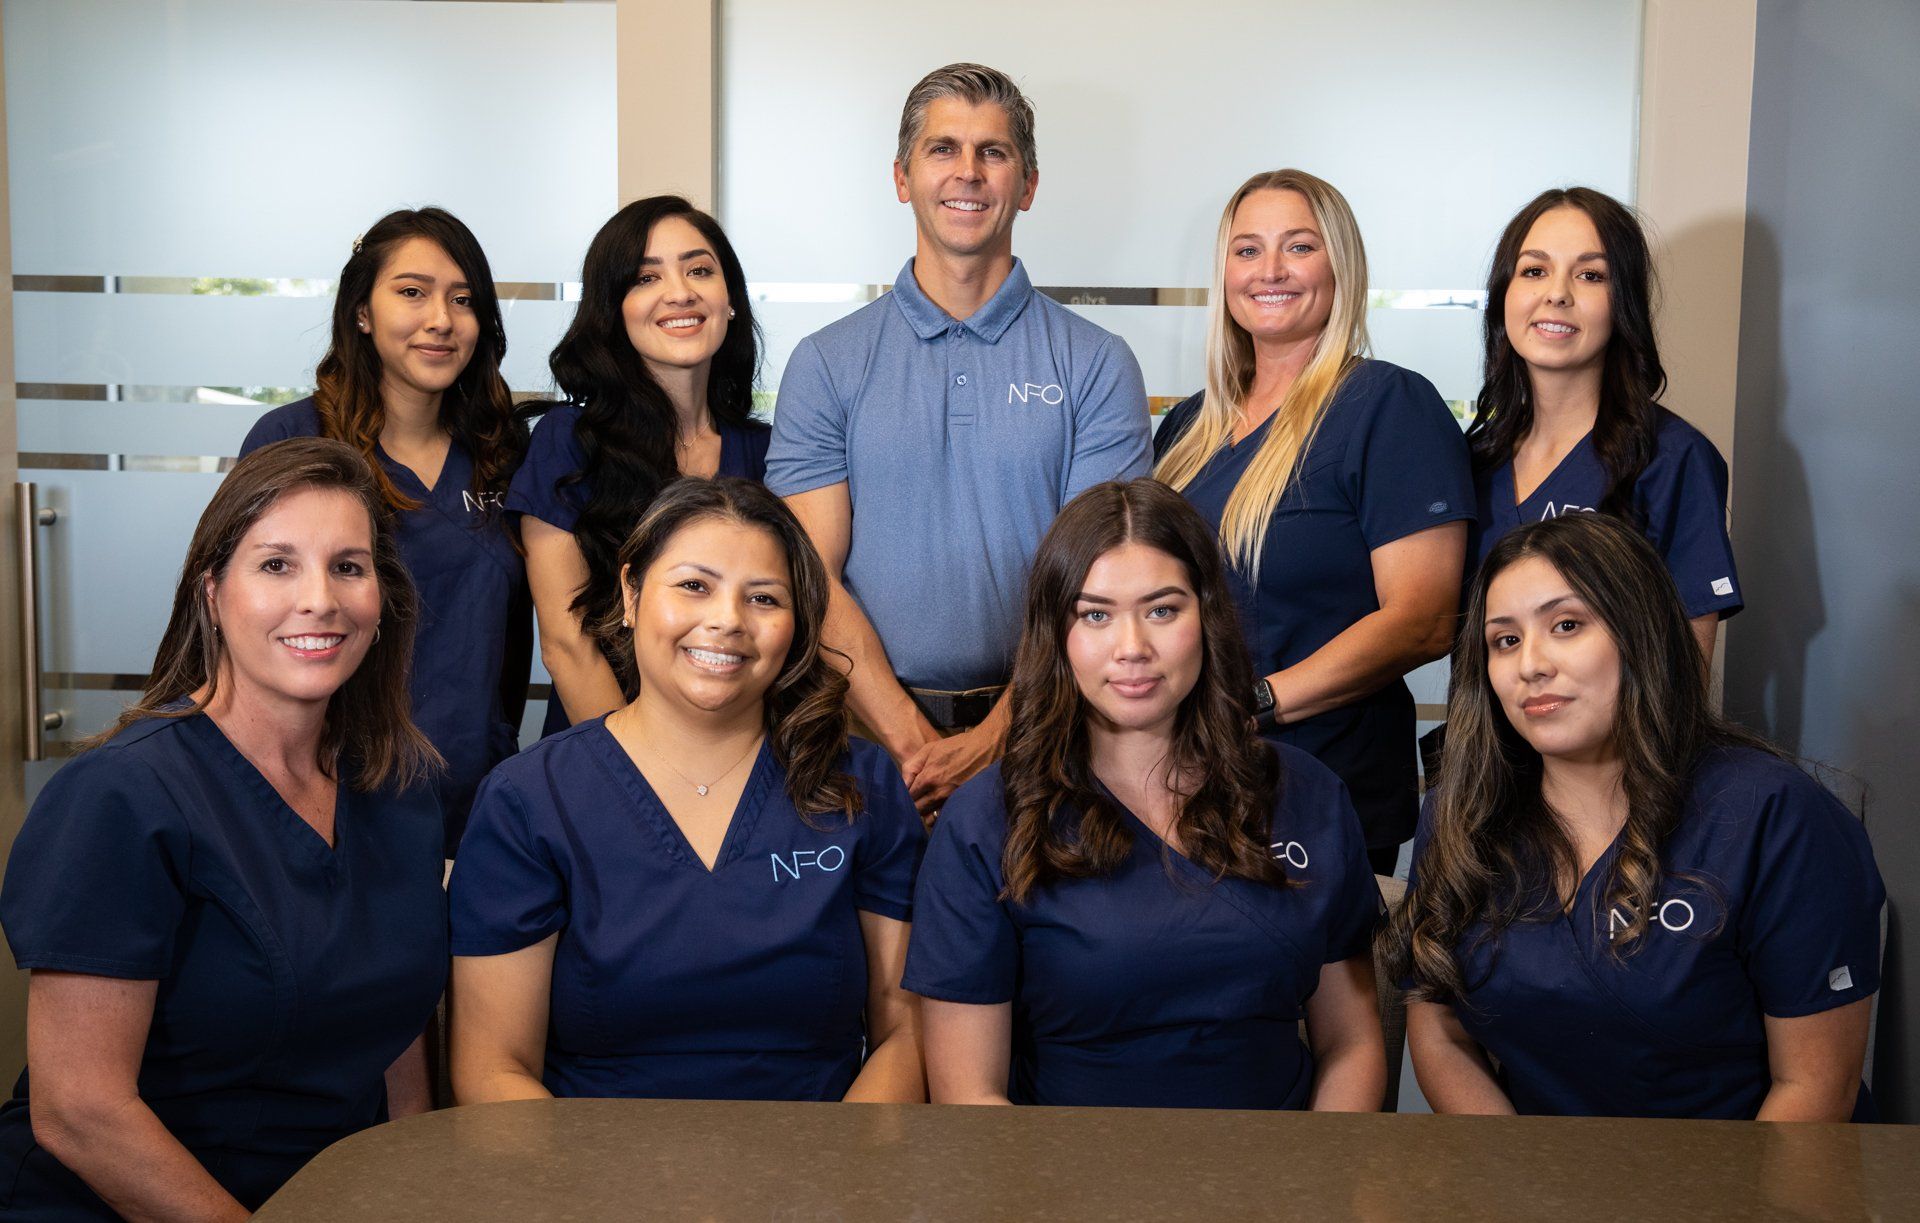 Nelson Family Orthodontics | About Us